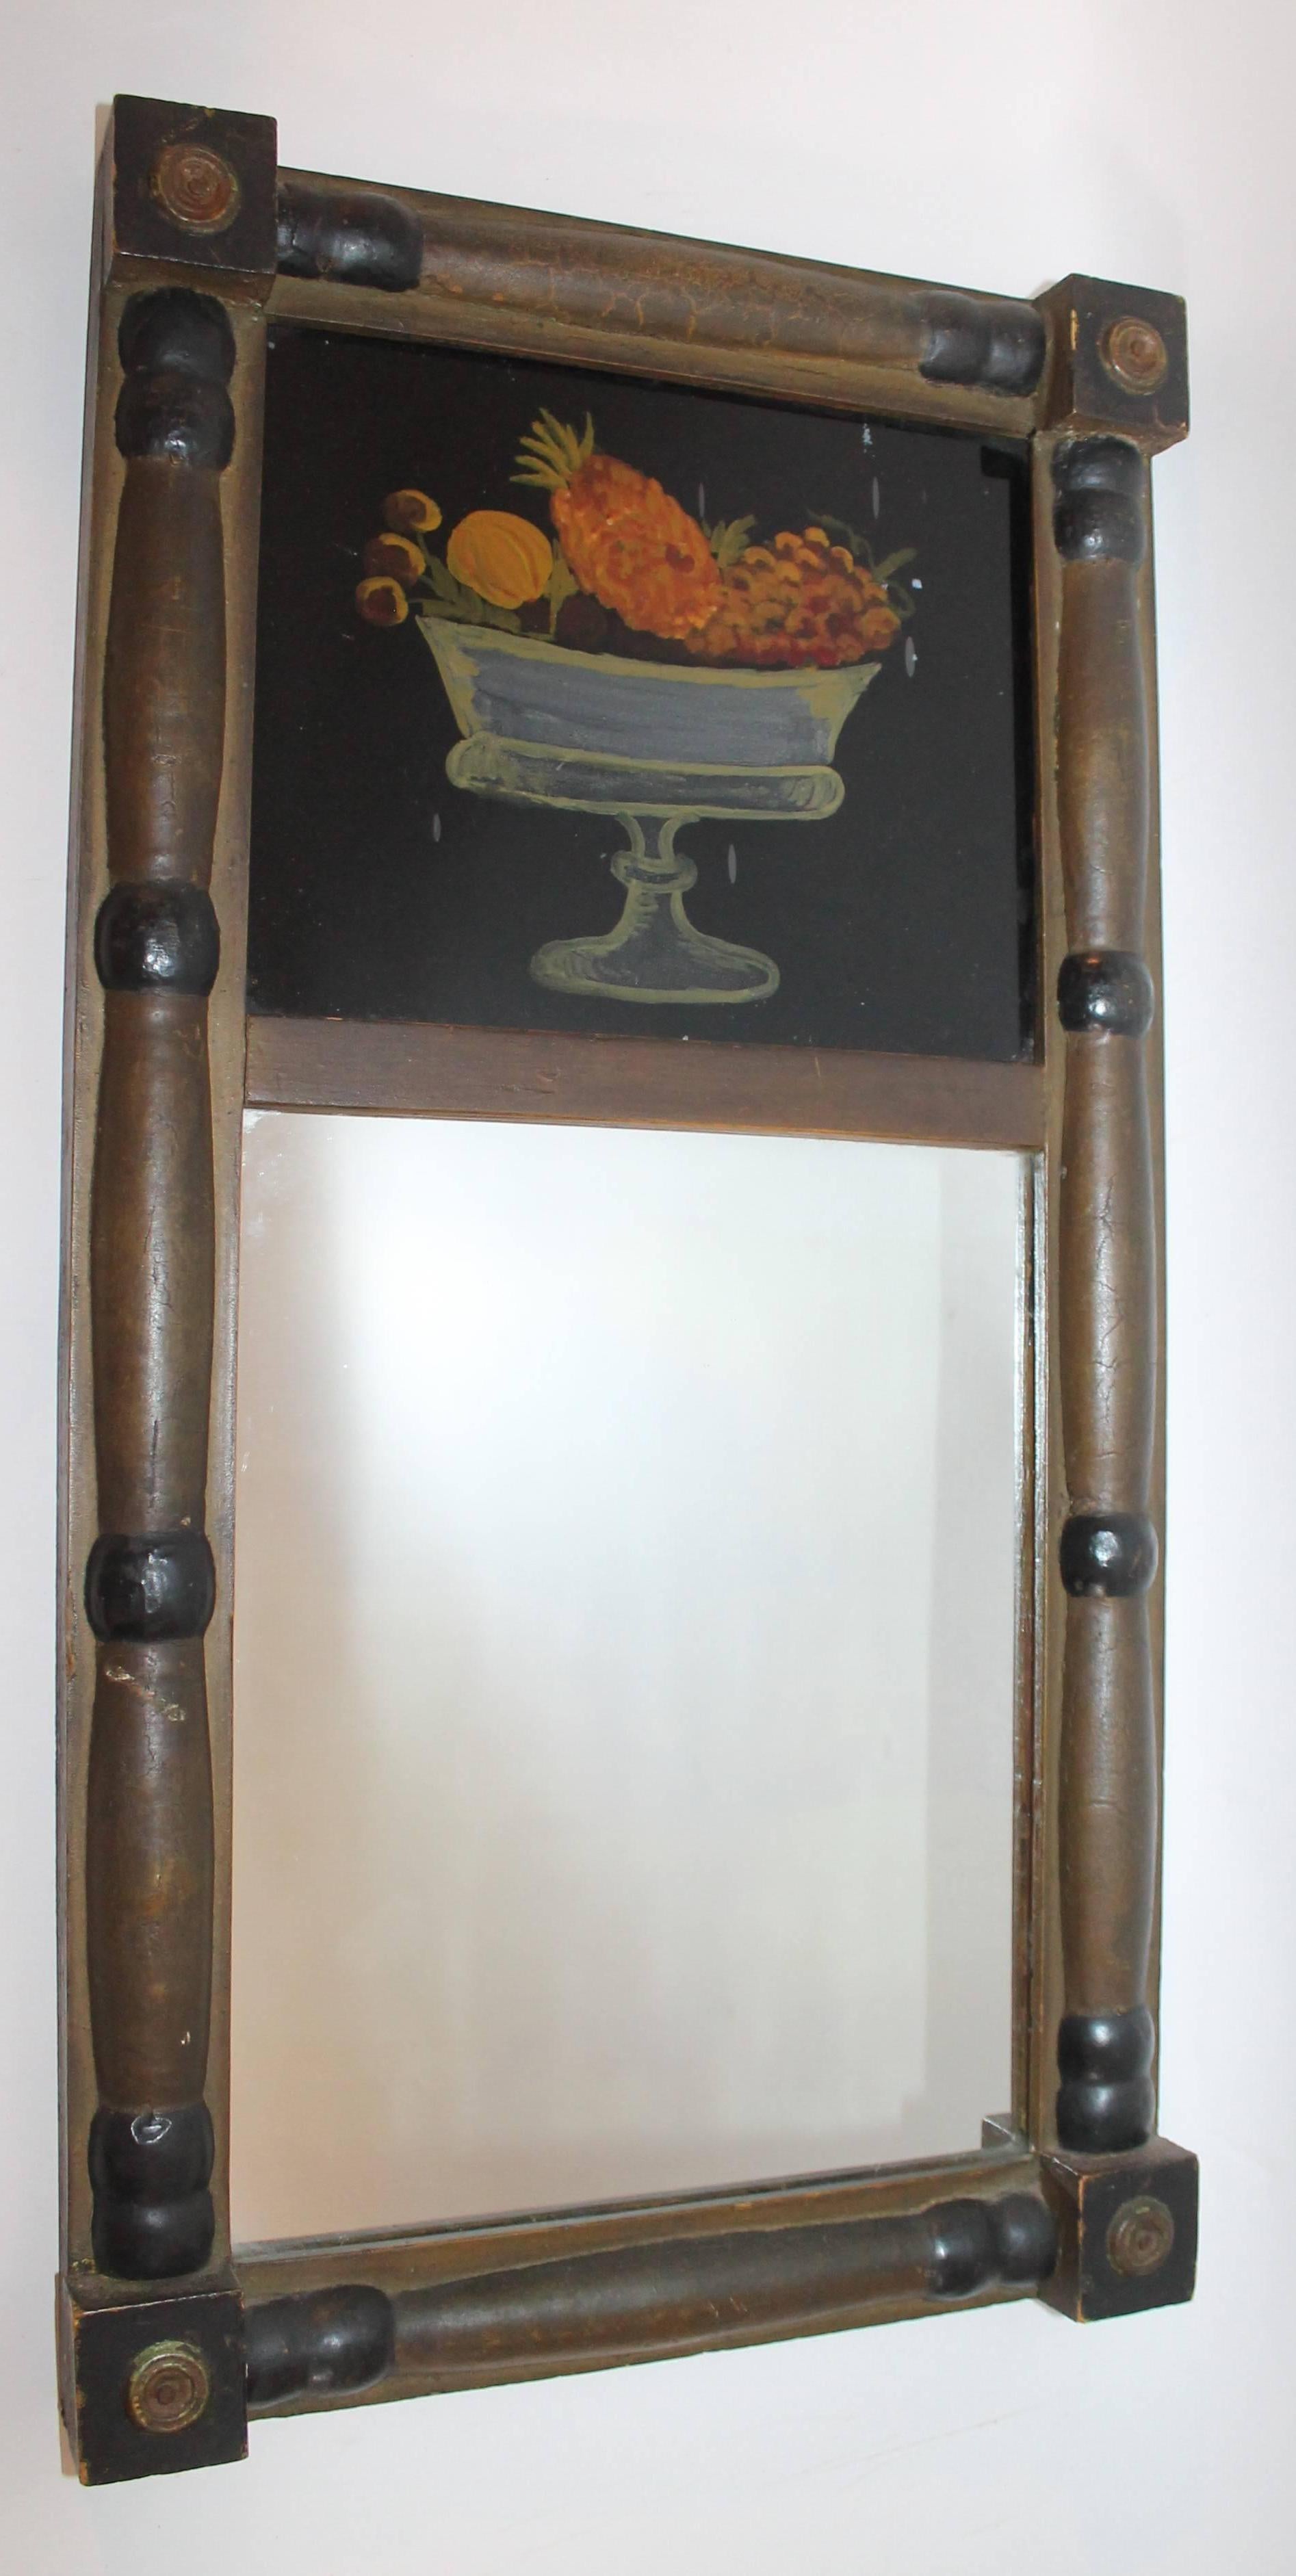 This early 19h century mirror with reverse painting of fruit bowl within the top enclosure. Original period wavy mirror and painted frame.